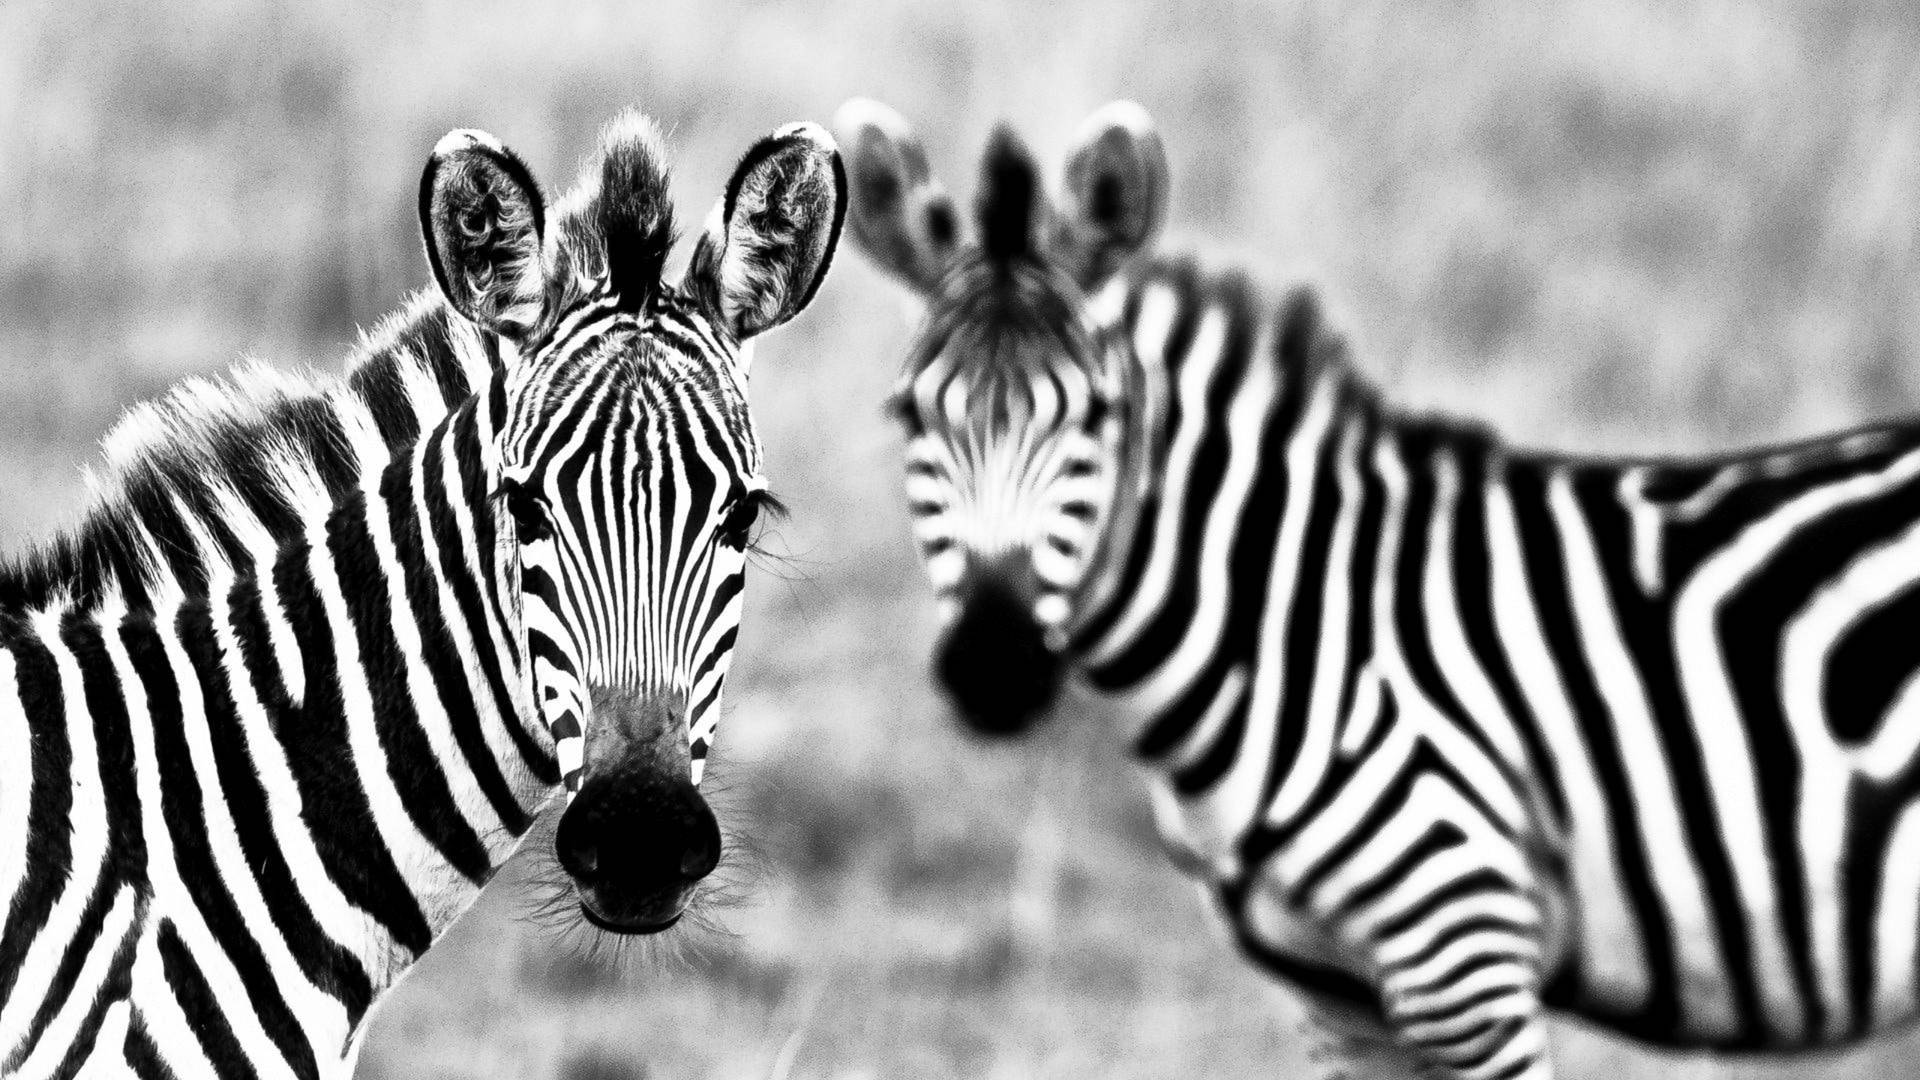 Two Zebras In Black And White Wallpaper